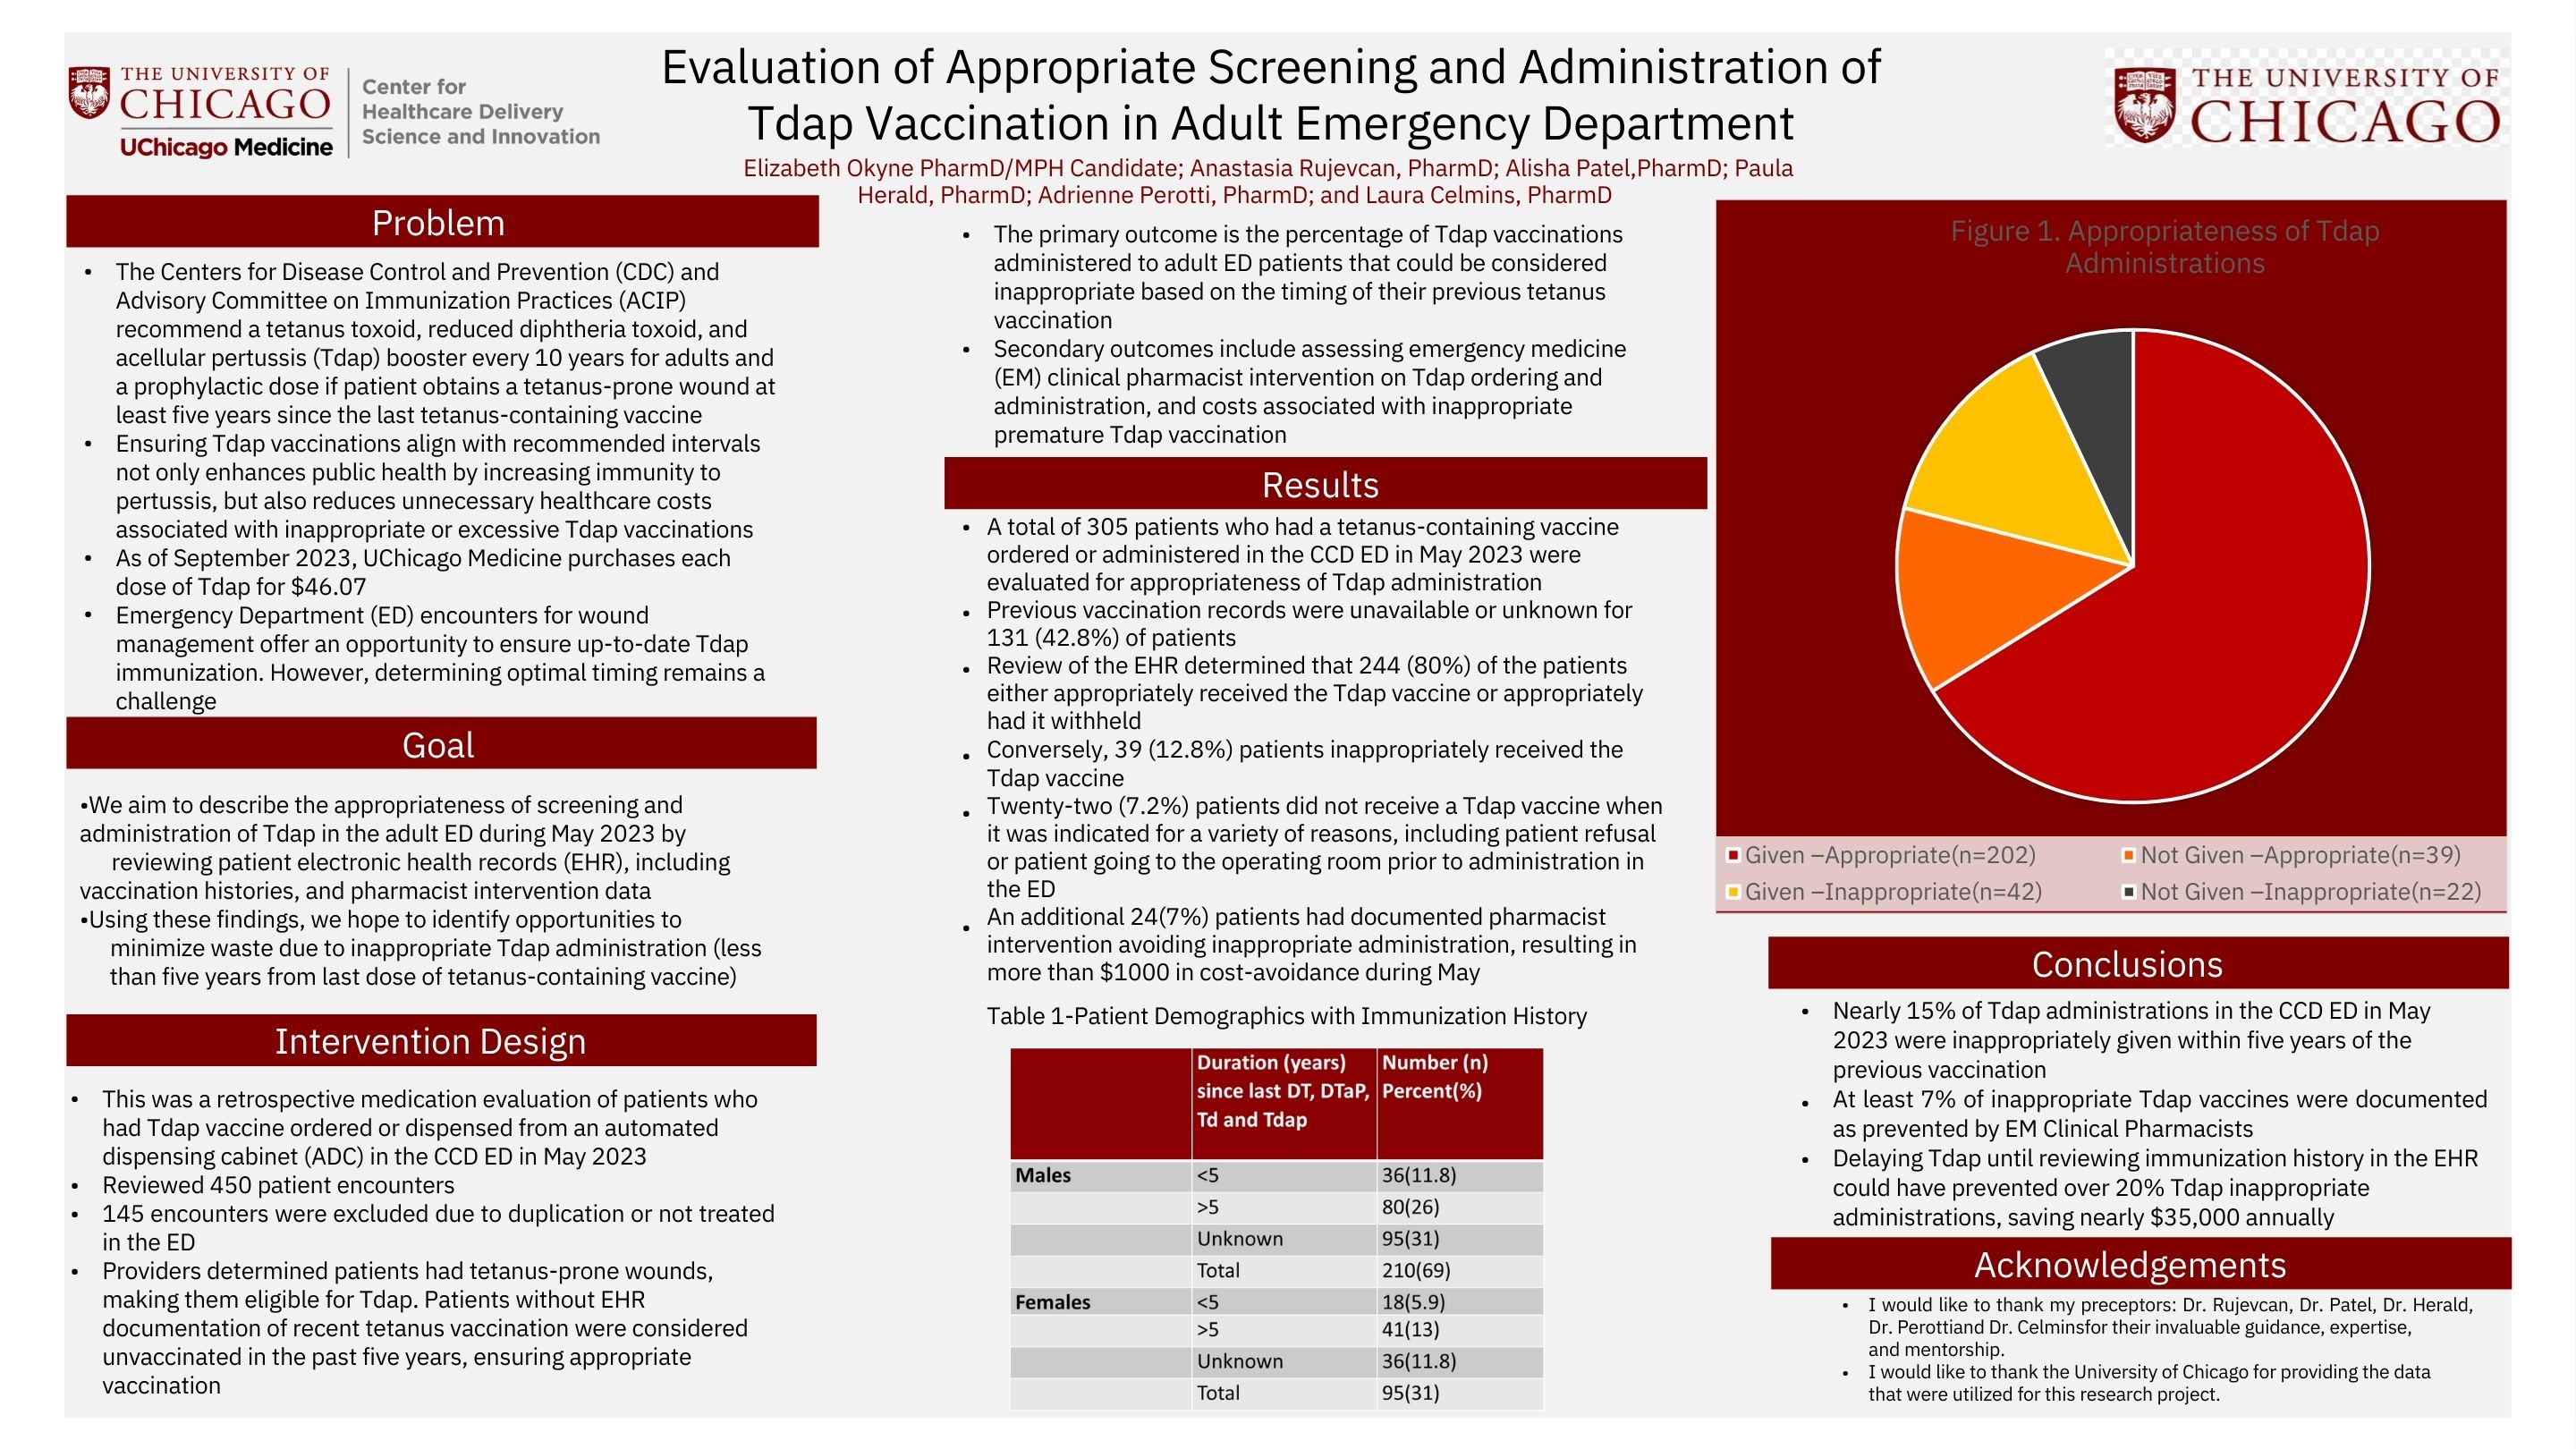 OKYNE_Evaluation-of-Appropriate-Screening-and-Administration-of-Tdap-Vaccination-in-Adult-Emergency-Department (1).pdf